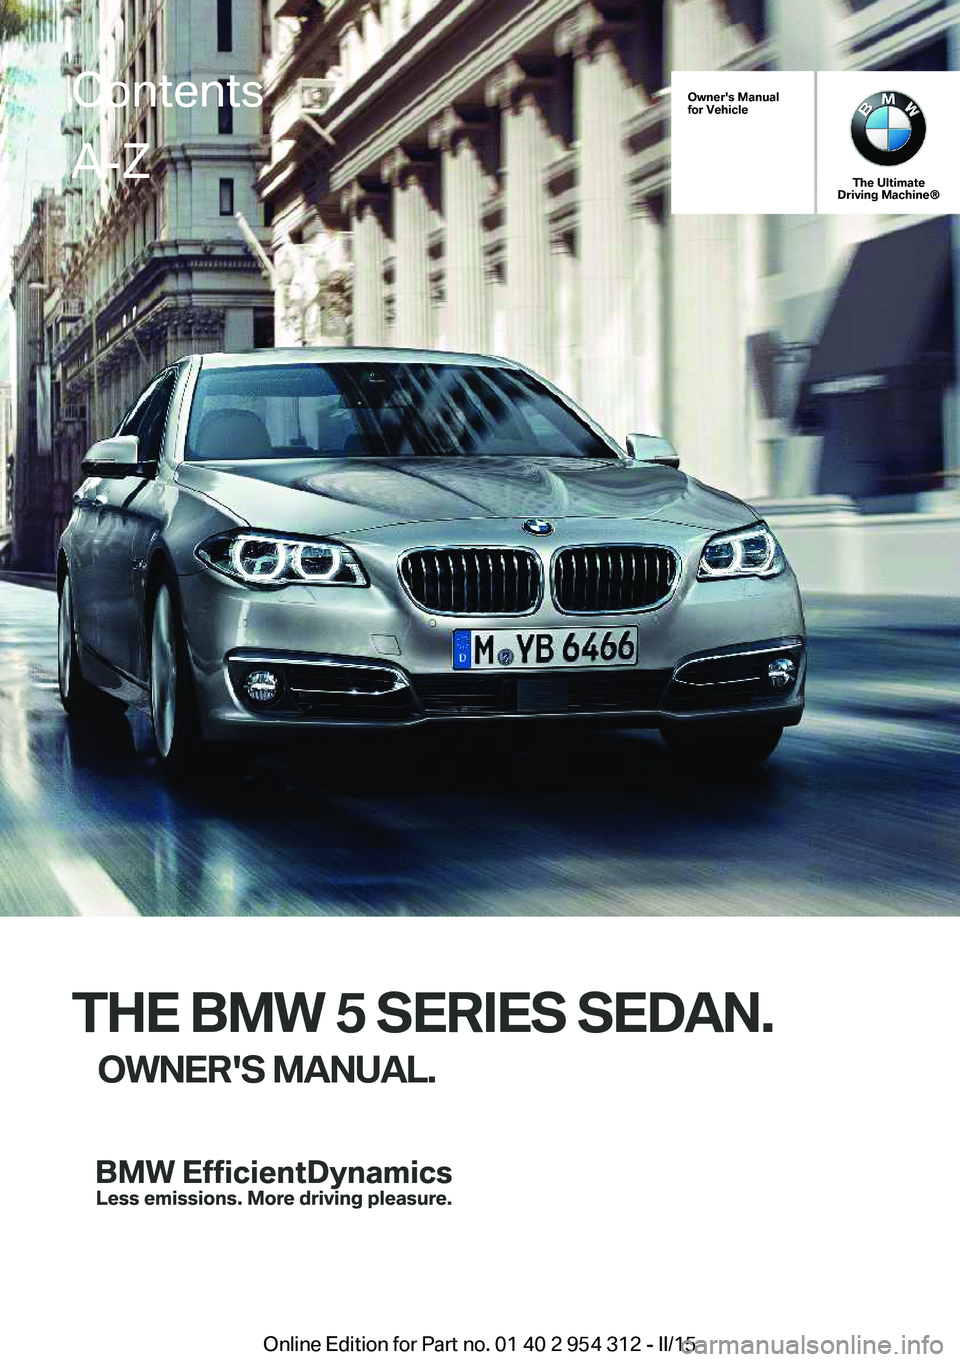 BMW 528I XDRIVE SEDAN 2015  Owners Manual Owner's Manual
for Vehicle
The Ultimate
Driving Machine®
THE BMW 5 SERIES SEDAN.
OWNER'S MANUAL.
ContentsA-Z
Online Edition for Part no. 01 40 2 954 312 - II/15   